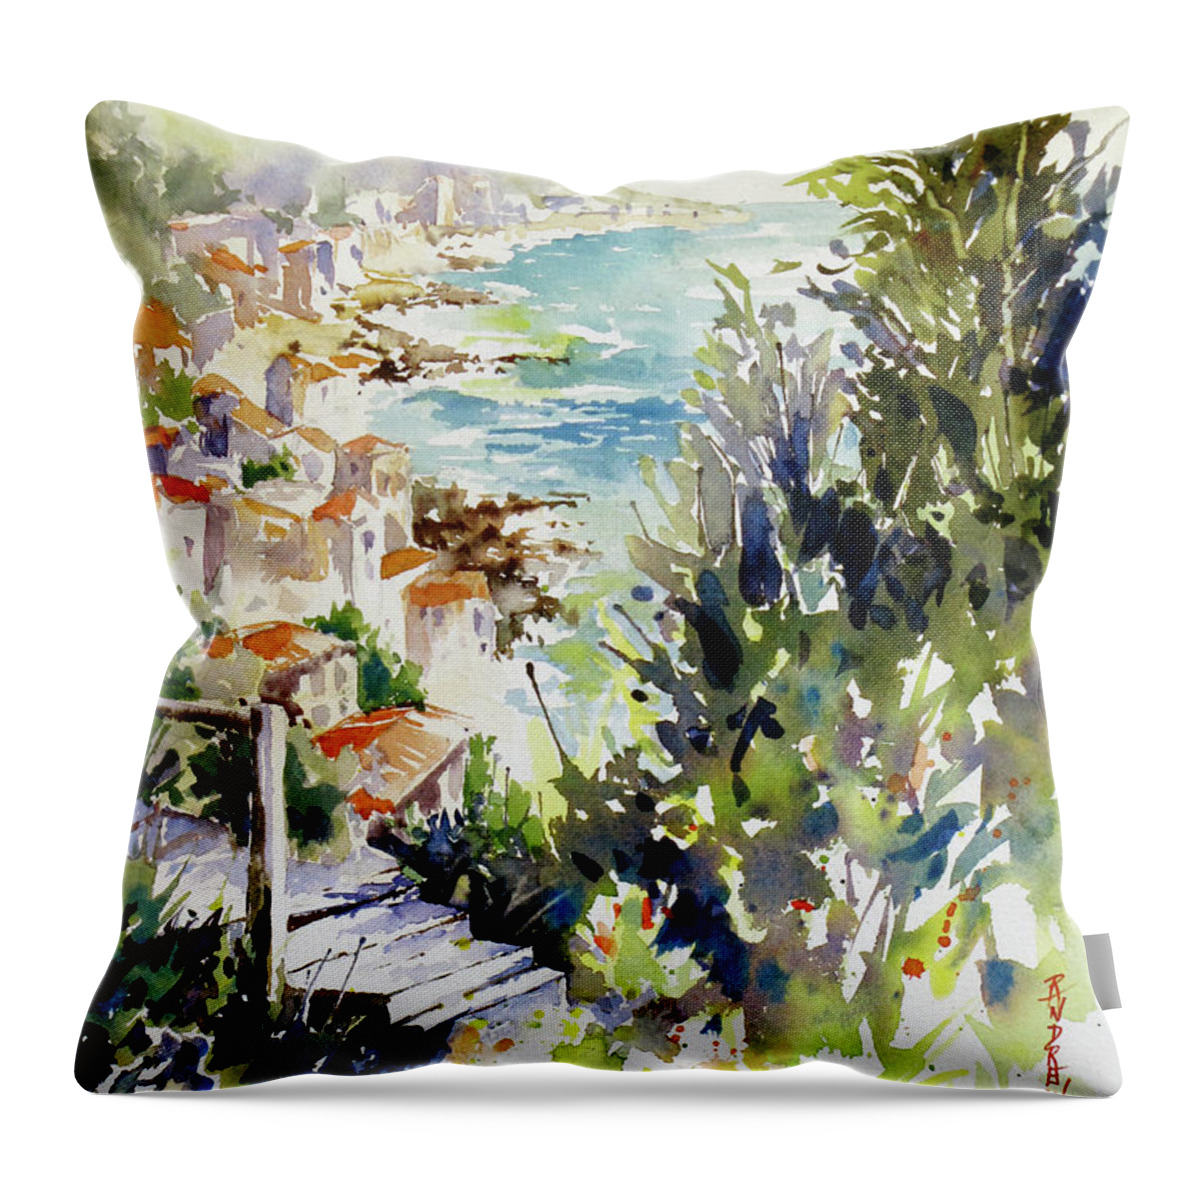 Watercolor Throw Pillow featuring the painting Whitewashed Vista by Rae Andrews